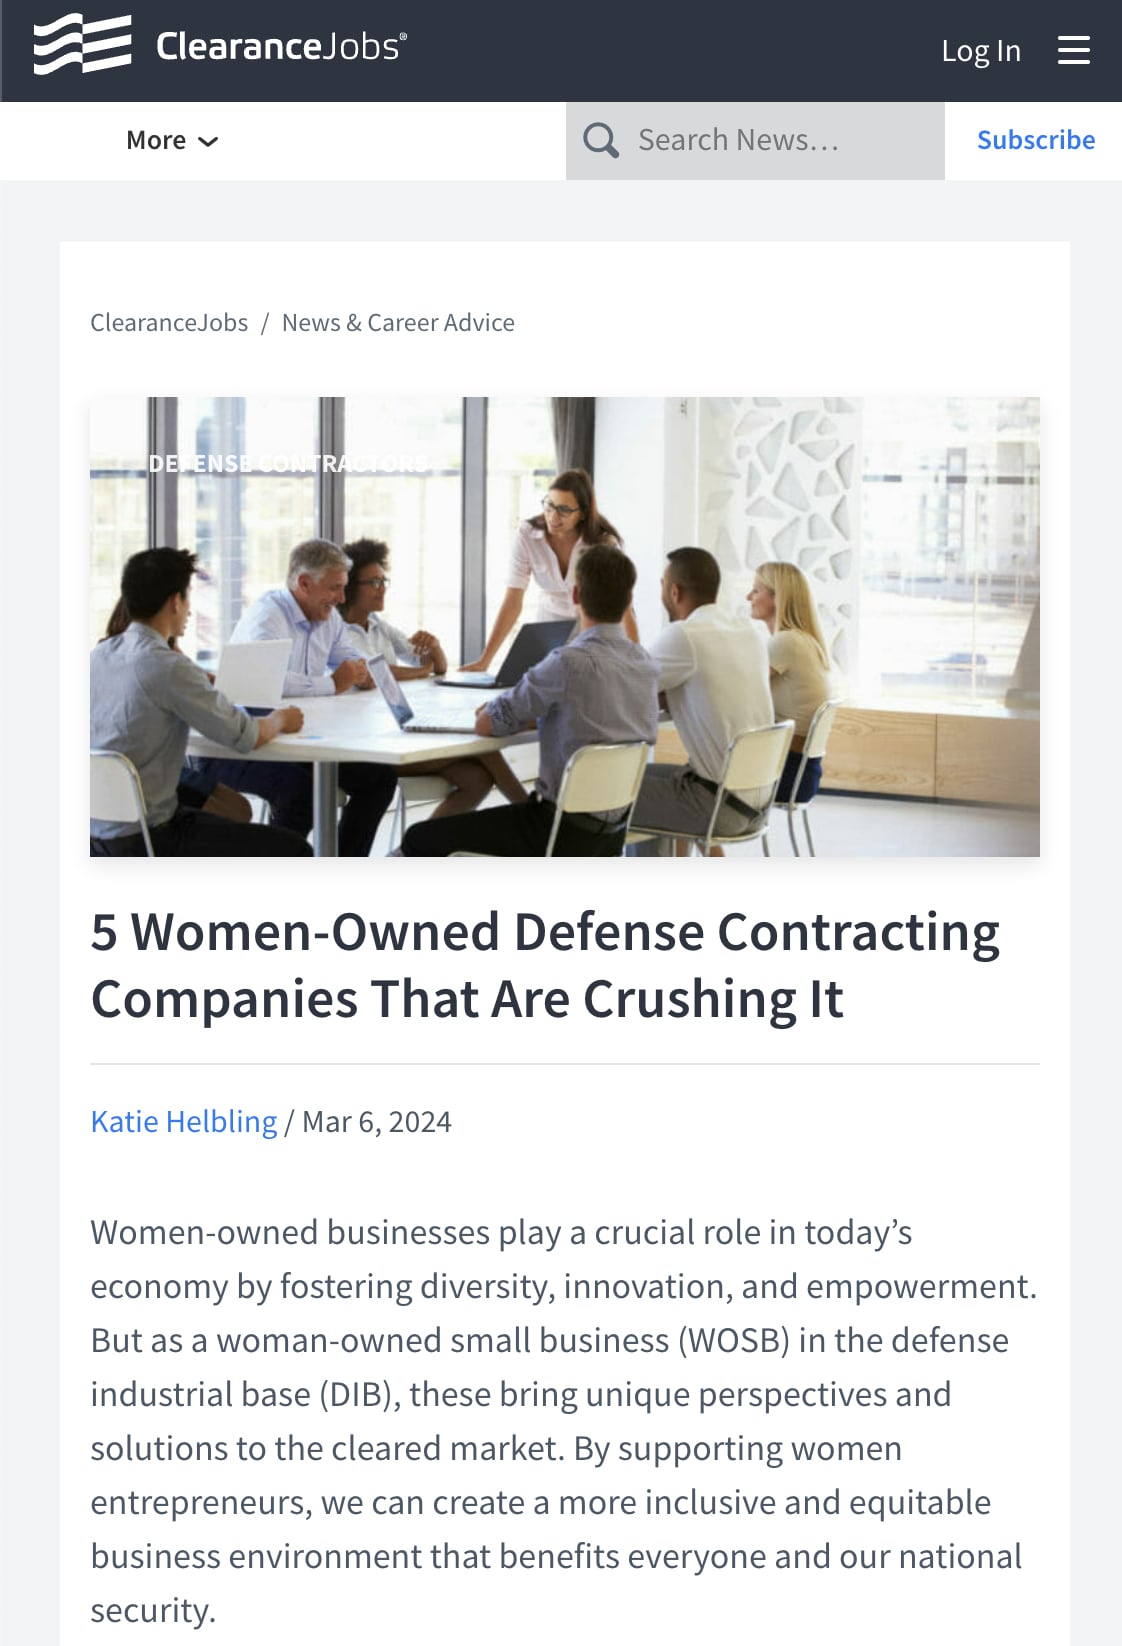 5 Women-Owned Defense Contracting Companies That Are Crushing It